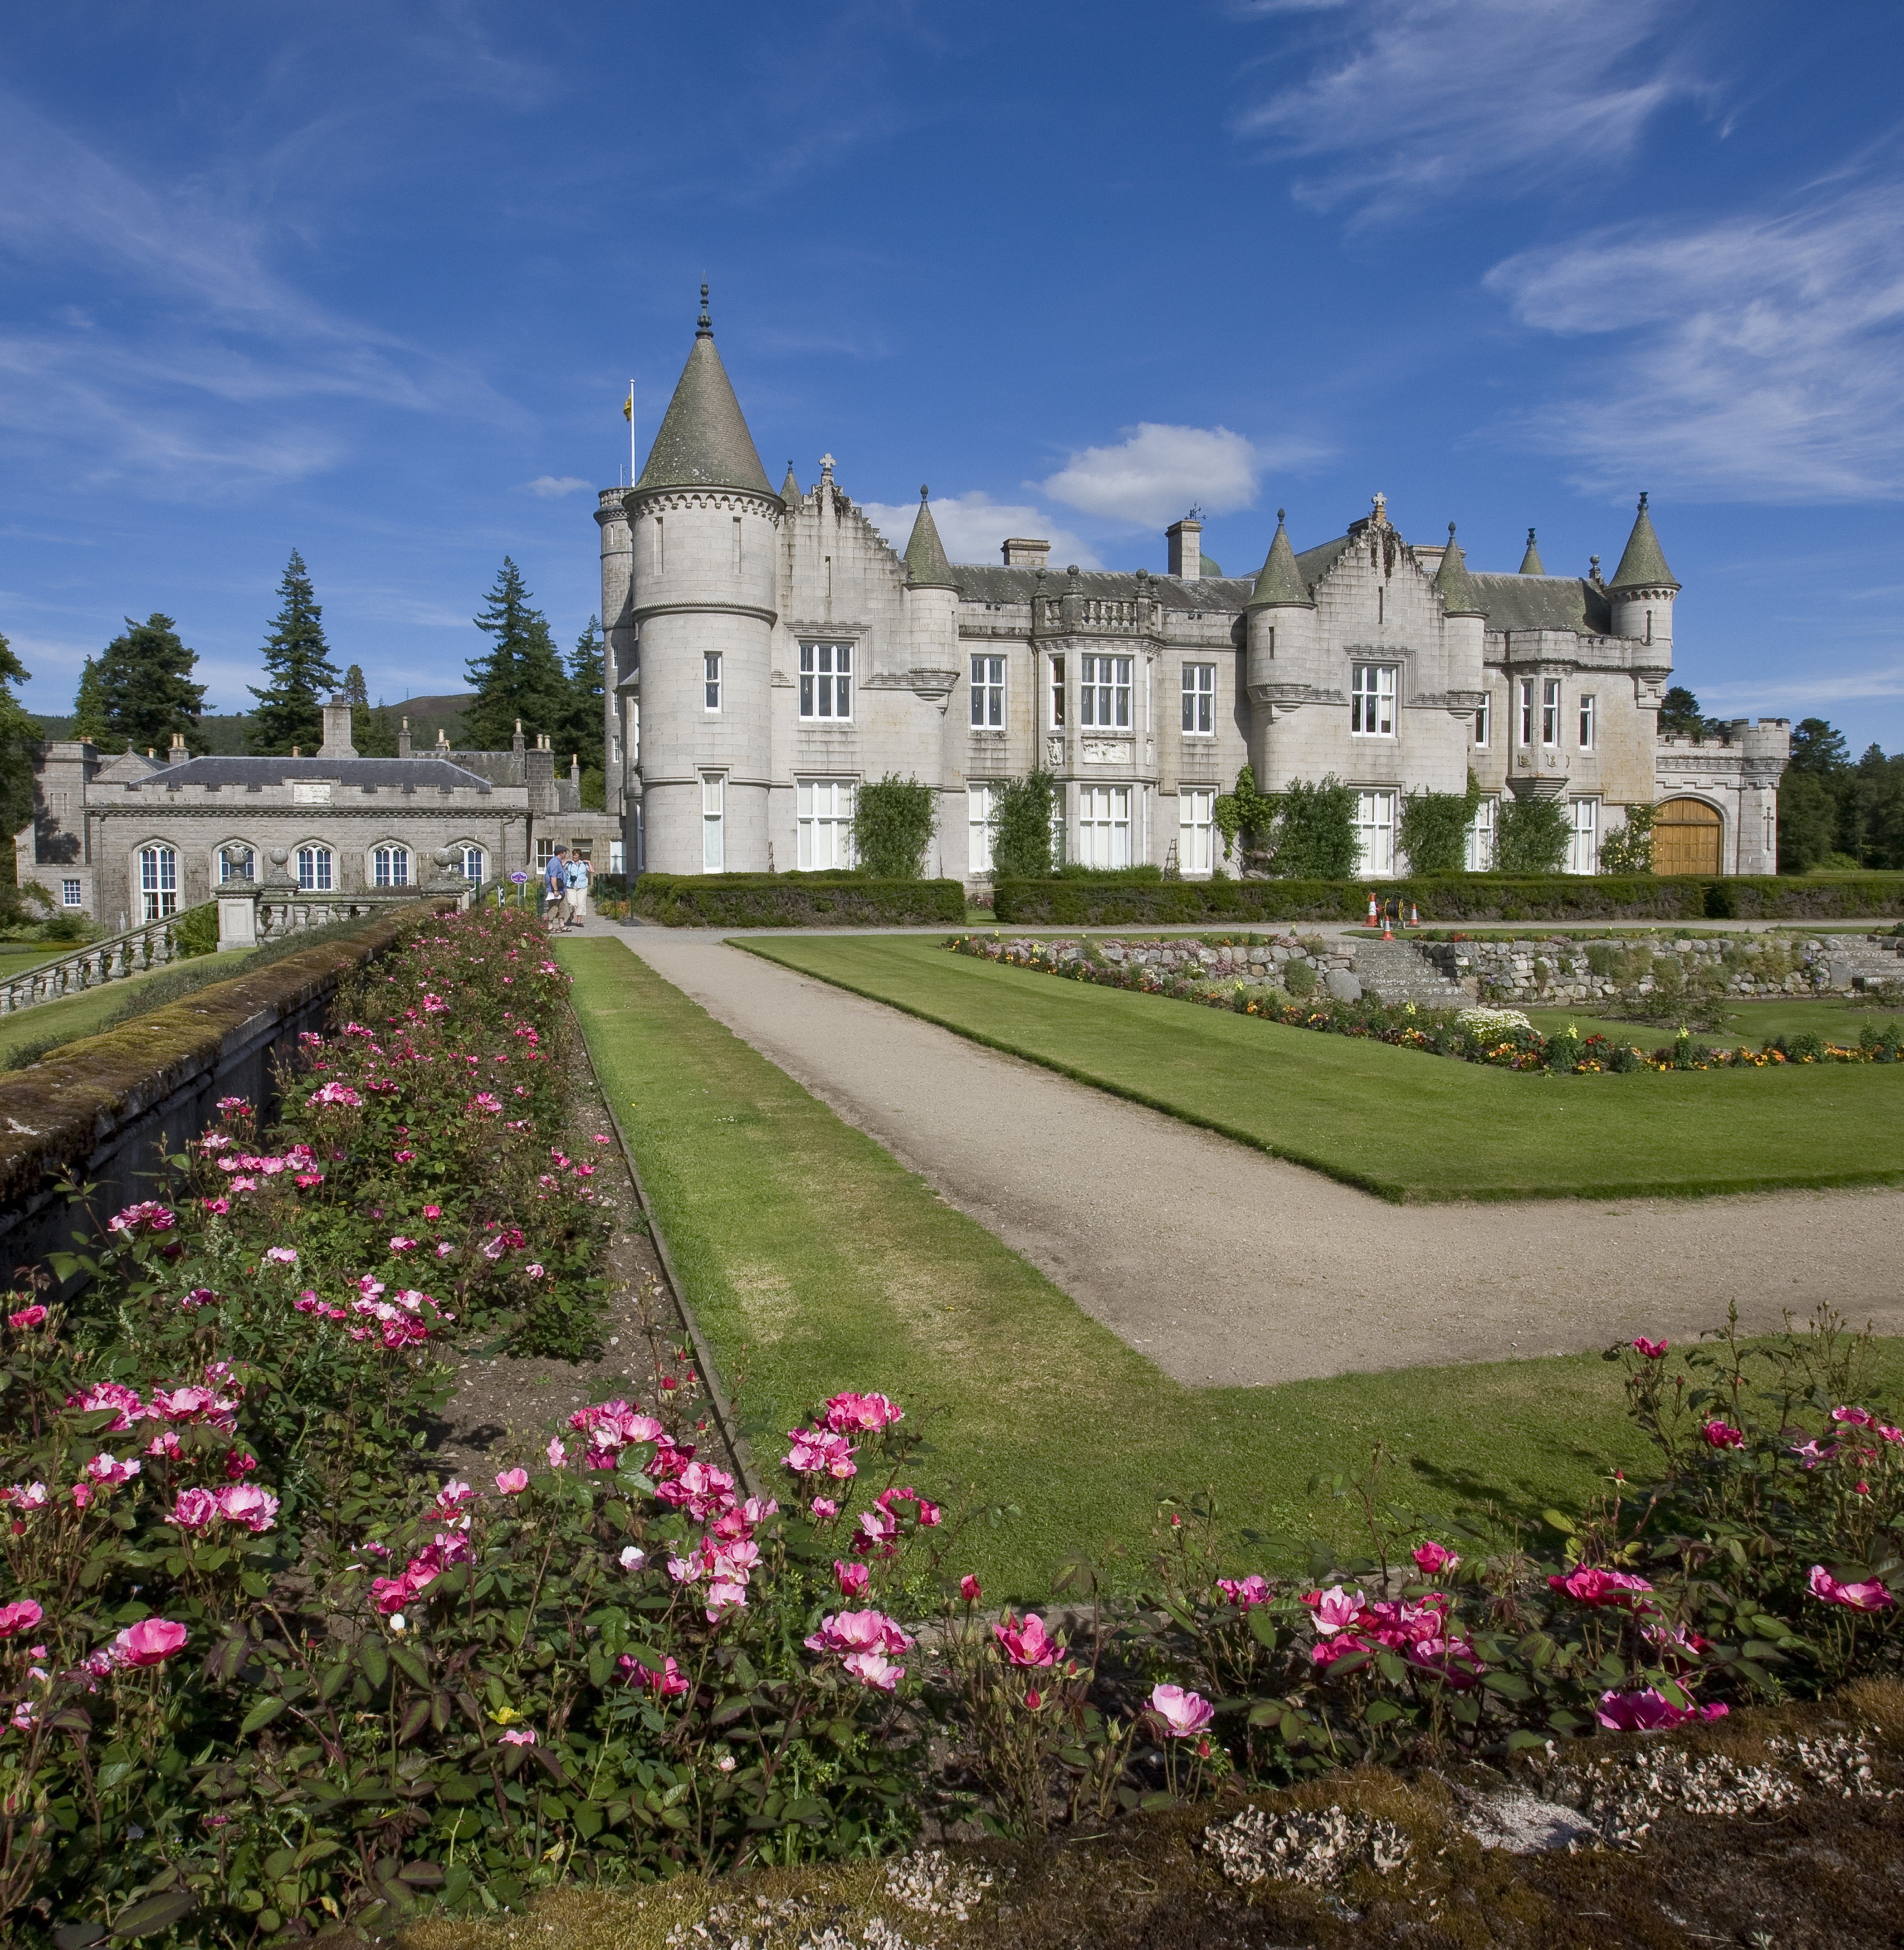 Balmoral Castle from the walled rose garden, residence of the British Royal Family, Royal Deeside, Aberdeenshire, Scotland, United Kingdom | Source: Getty Images